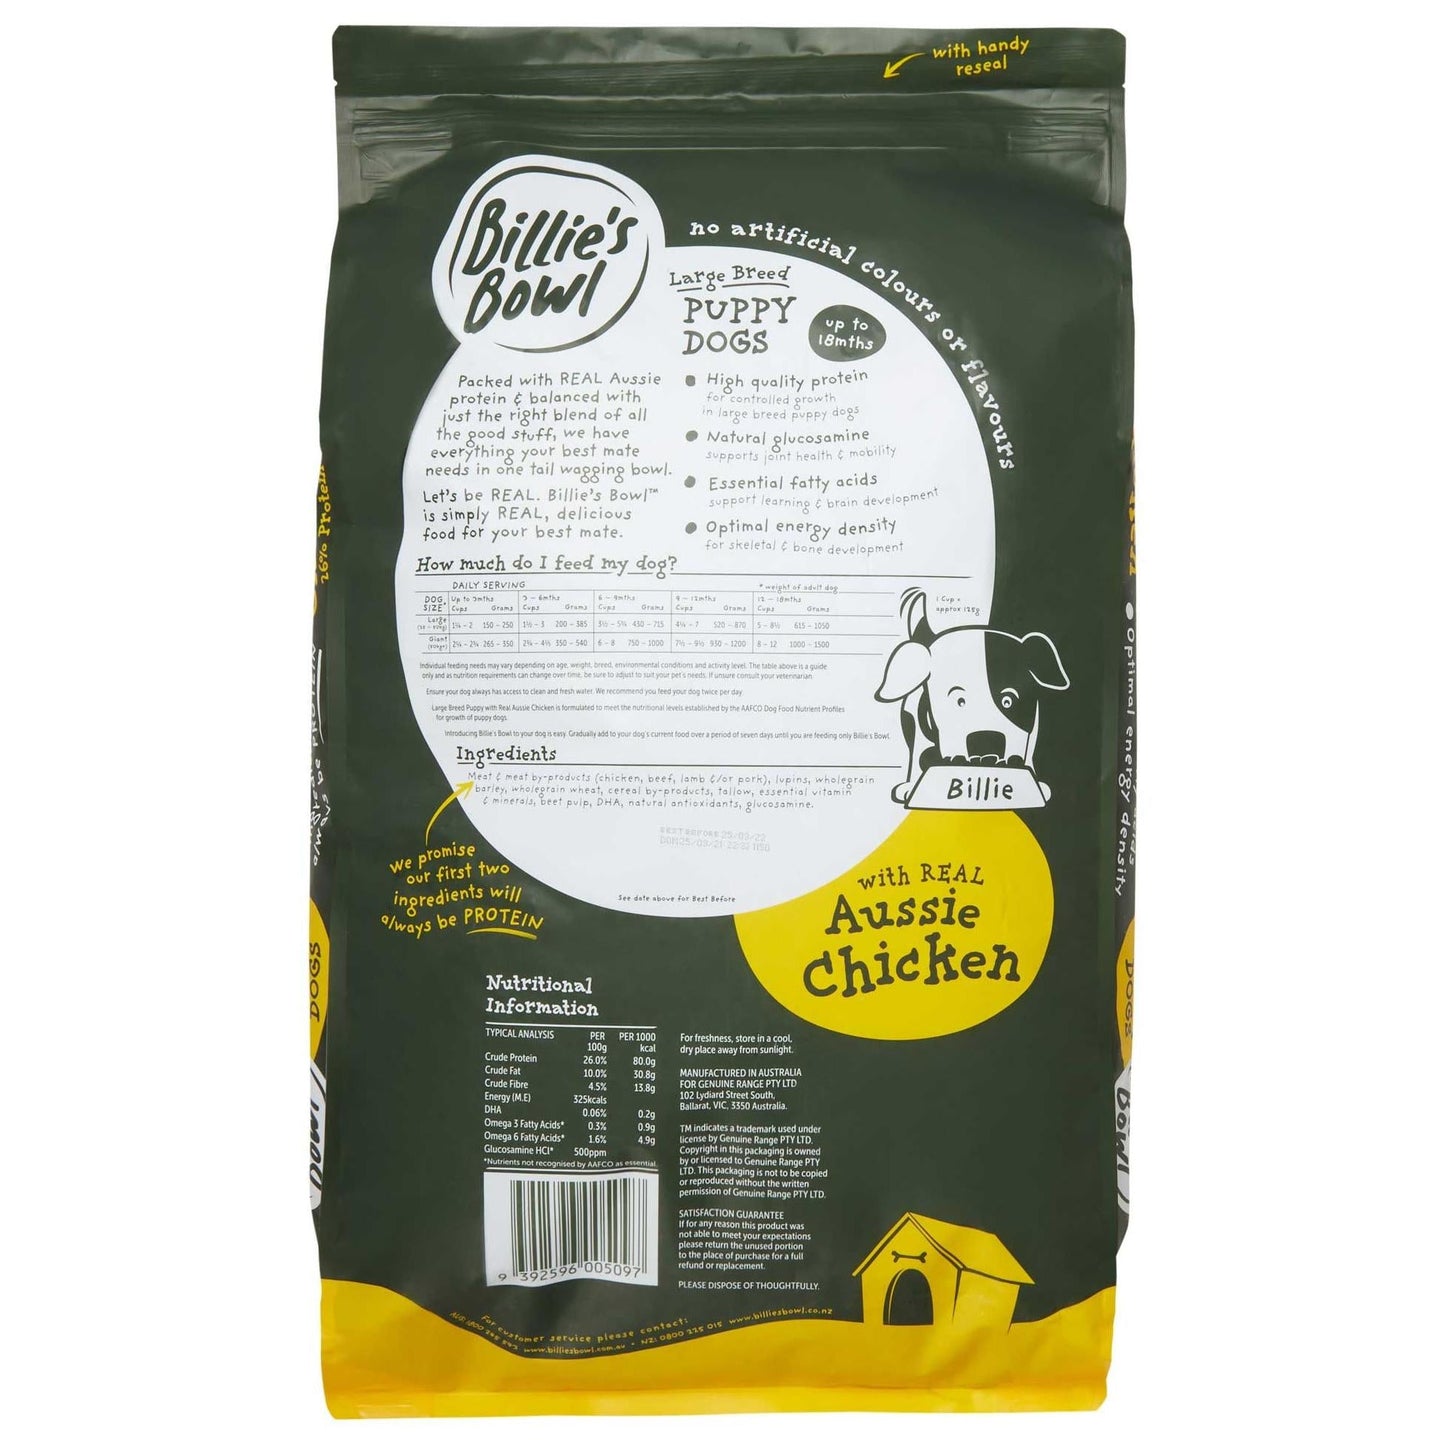 Billie's Bowl Large Breed Puppy with REAL Aussie Chicken Dry Dog Food 10kg